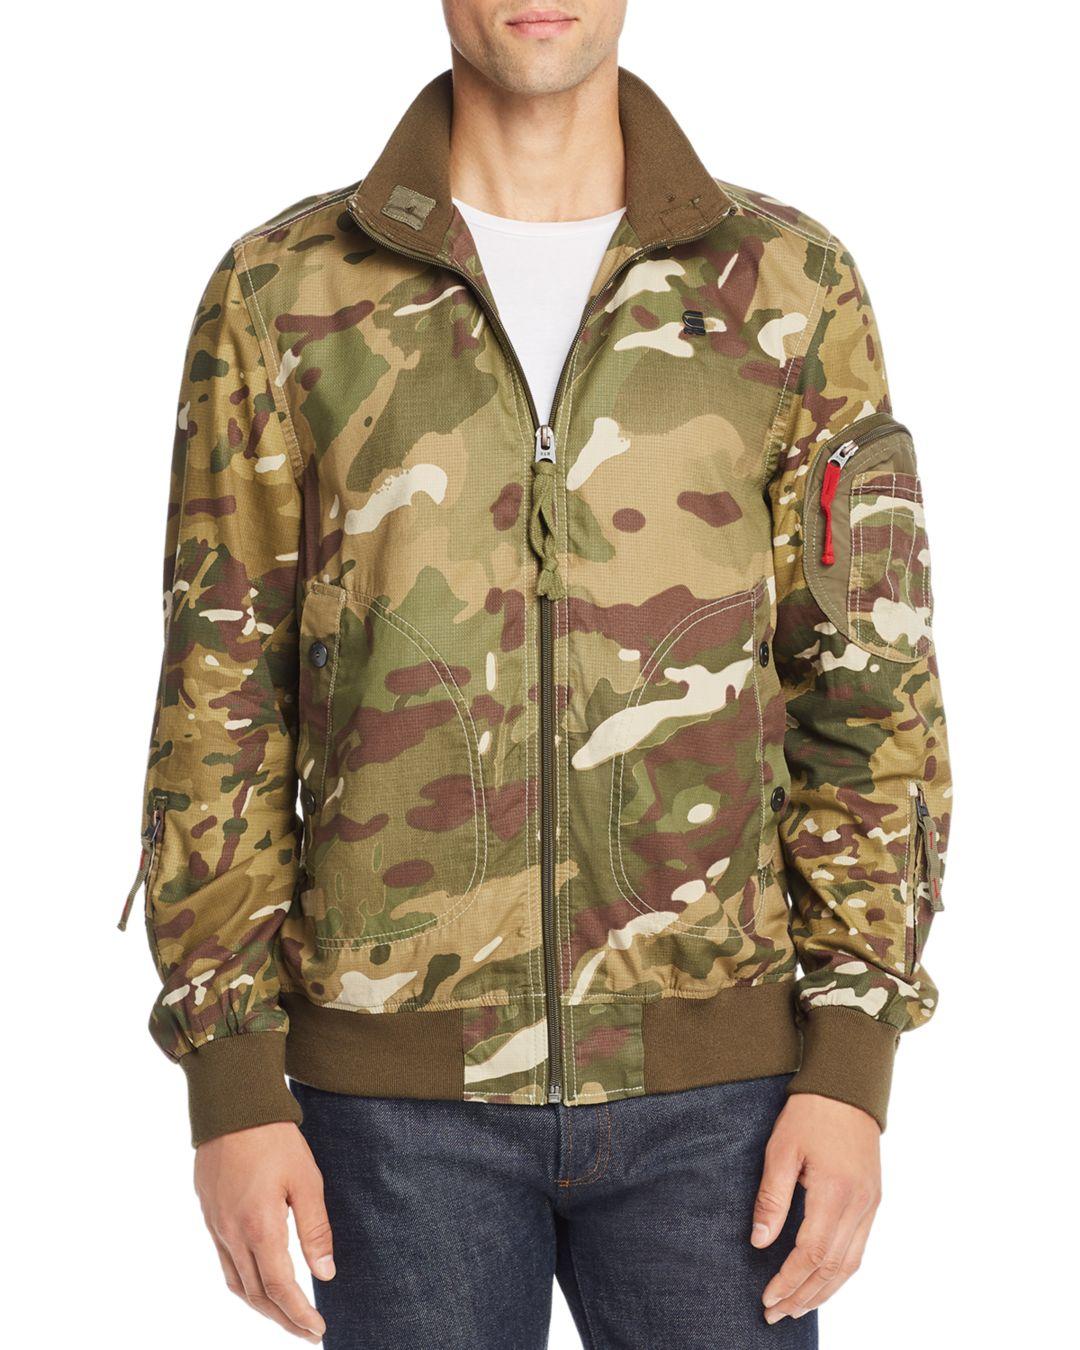 G-Star RAW Cotton G - Star Raw Bolt Camouflage Print Bomber Jacket in ...